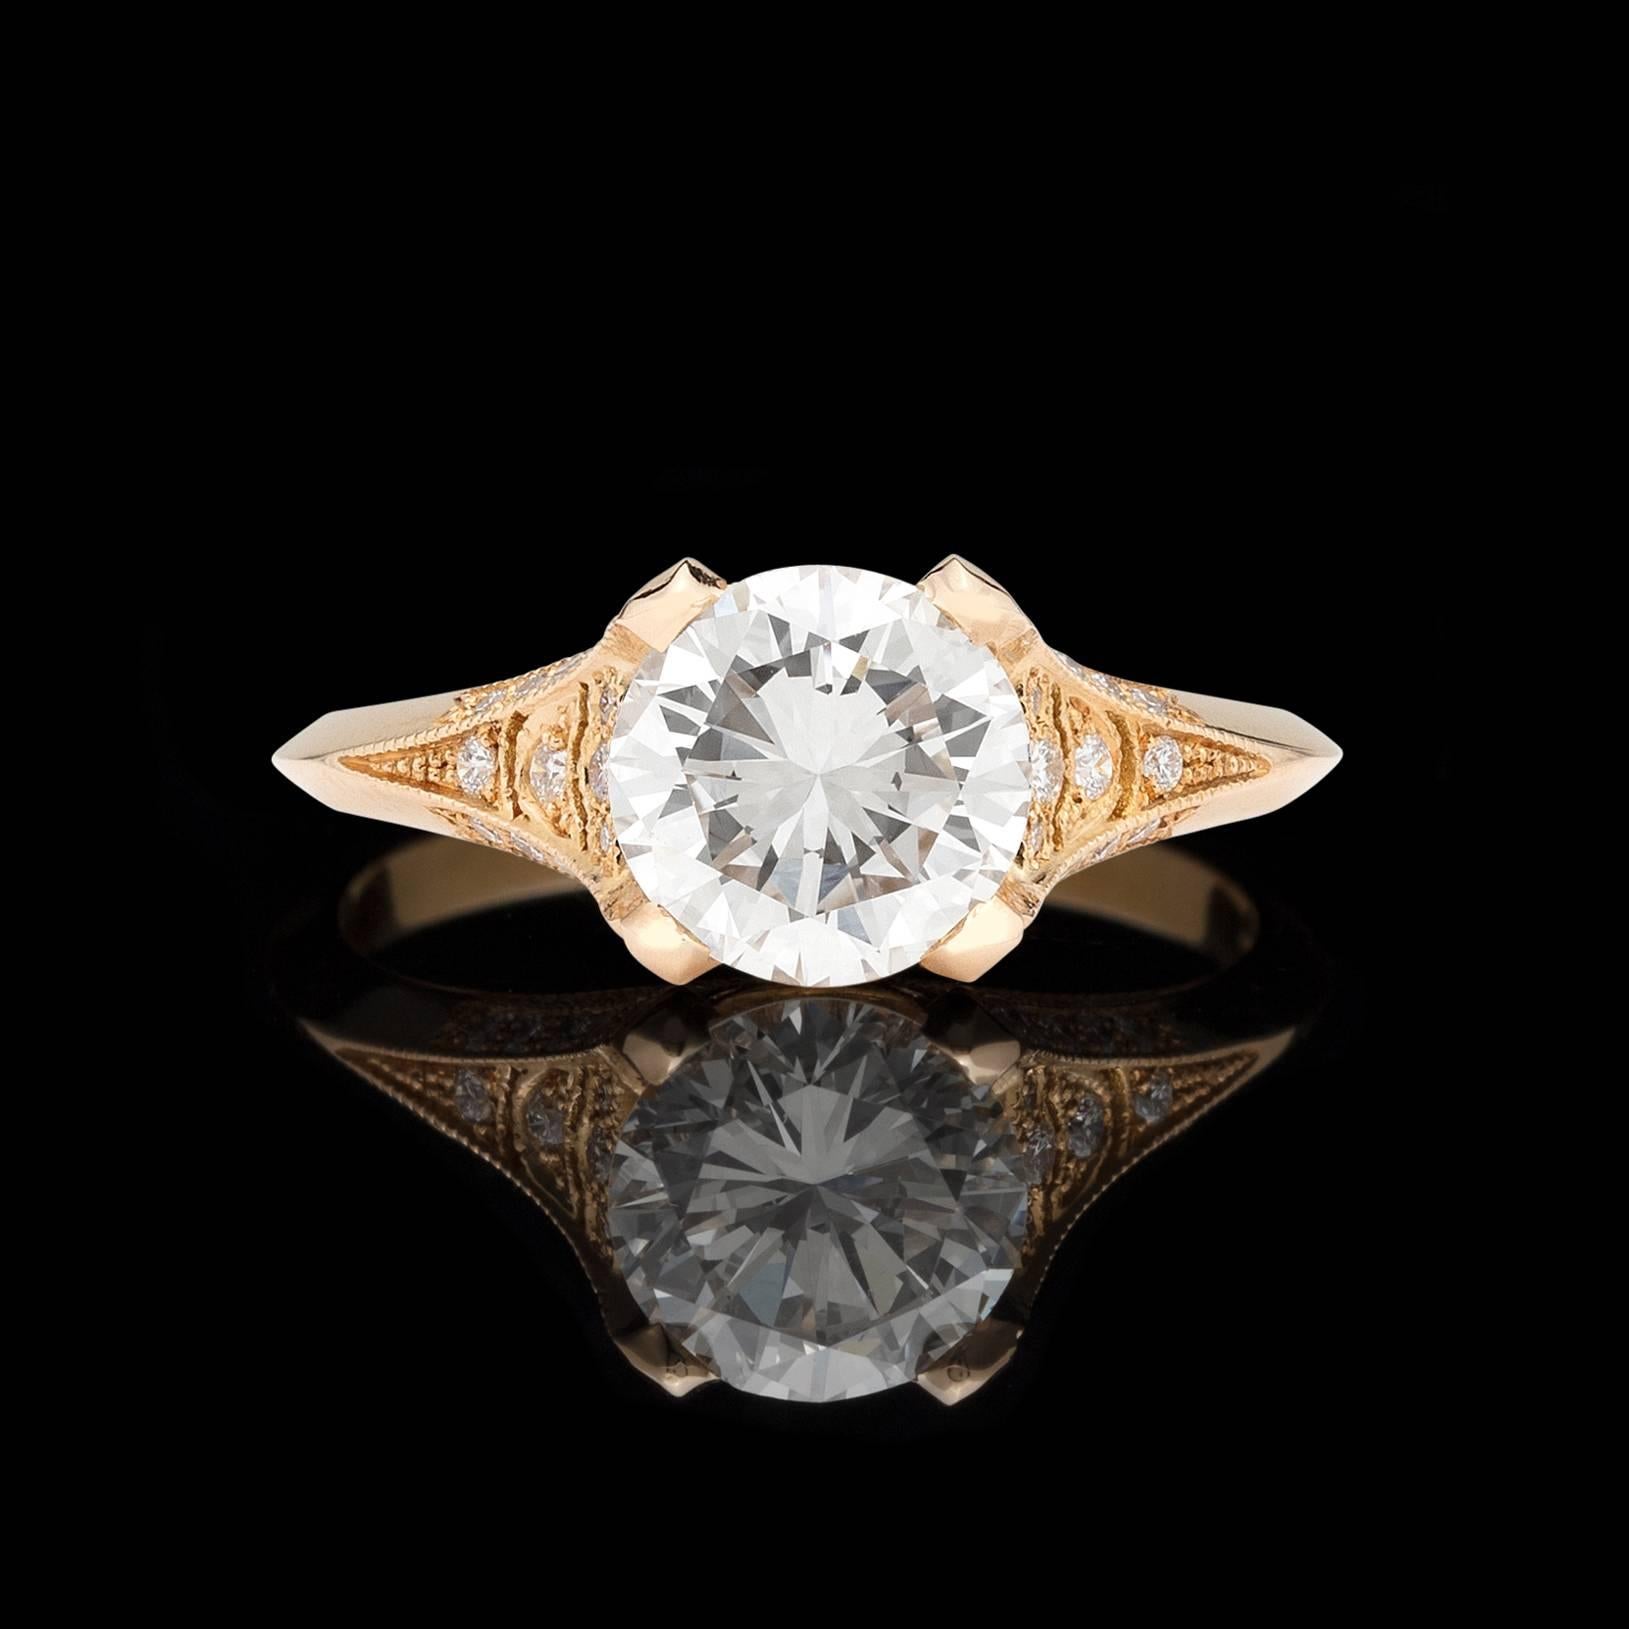 An absolute knockout! This handmade 18 karat Yellow Gold French ring is the perfect combination of fine craftsmanship and fine goods. The center stone is a 1.53 carat GIA graded F/VS1 boasting phenomenal color and clarity along with incredible